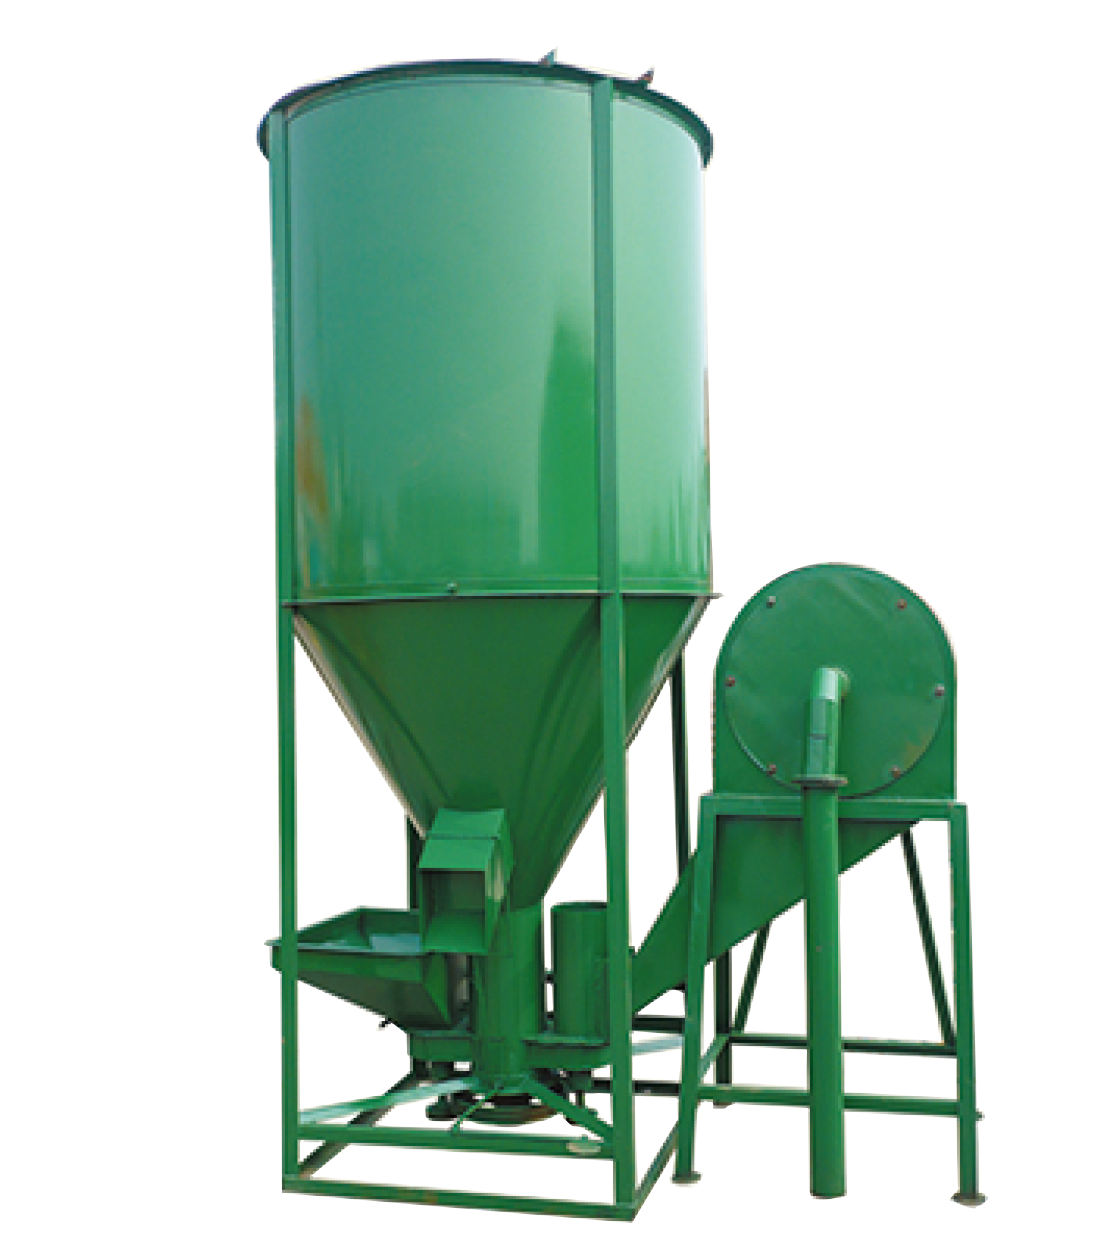 Feed grinder & mixer machine for animal feed, cattle, sheep, fish and so on.